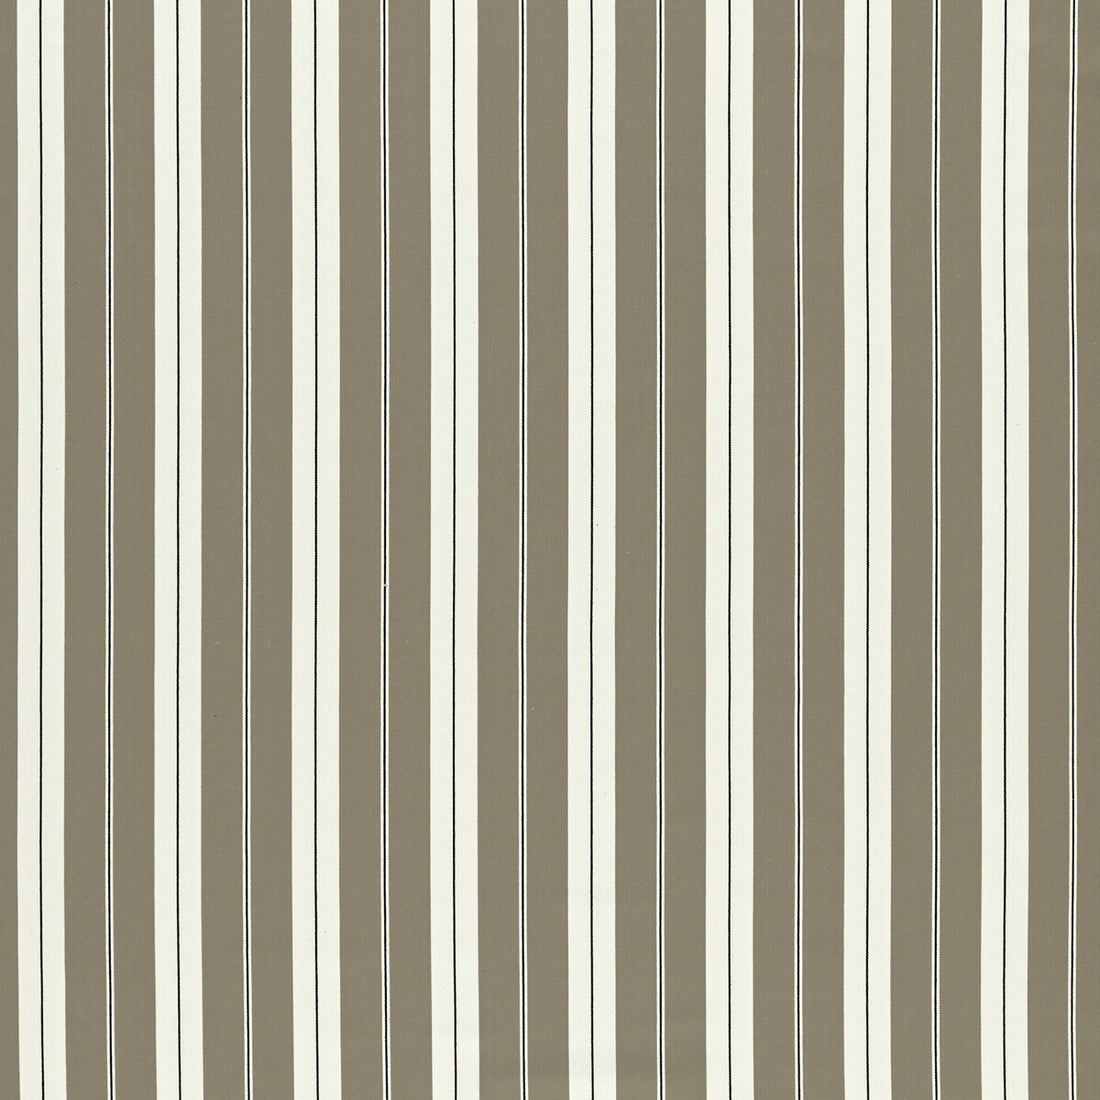 Belgravia fabric in charcoal/linen color - pattern F1497/01.CAC.0 - by Clarke And Clarke in the Clarke &amp; Clarke Edgeworth collection